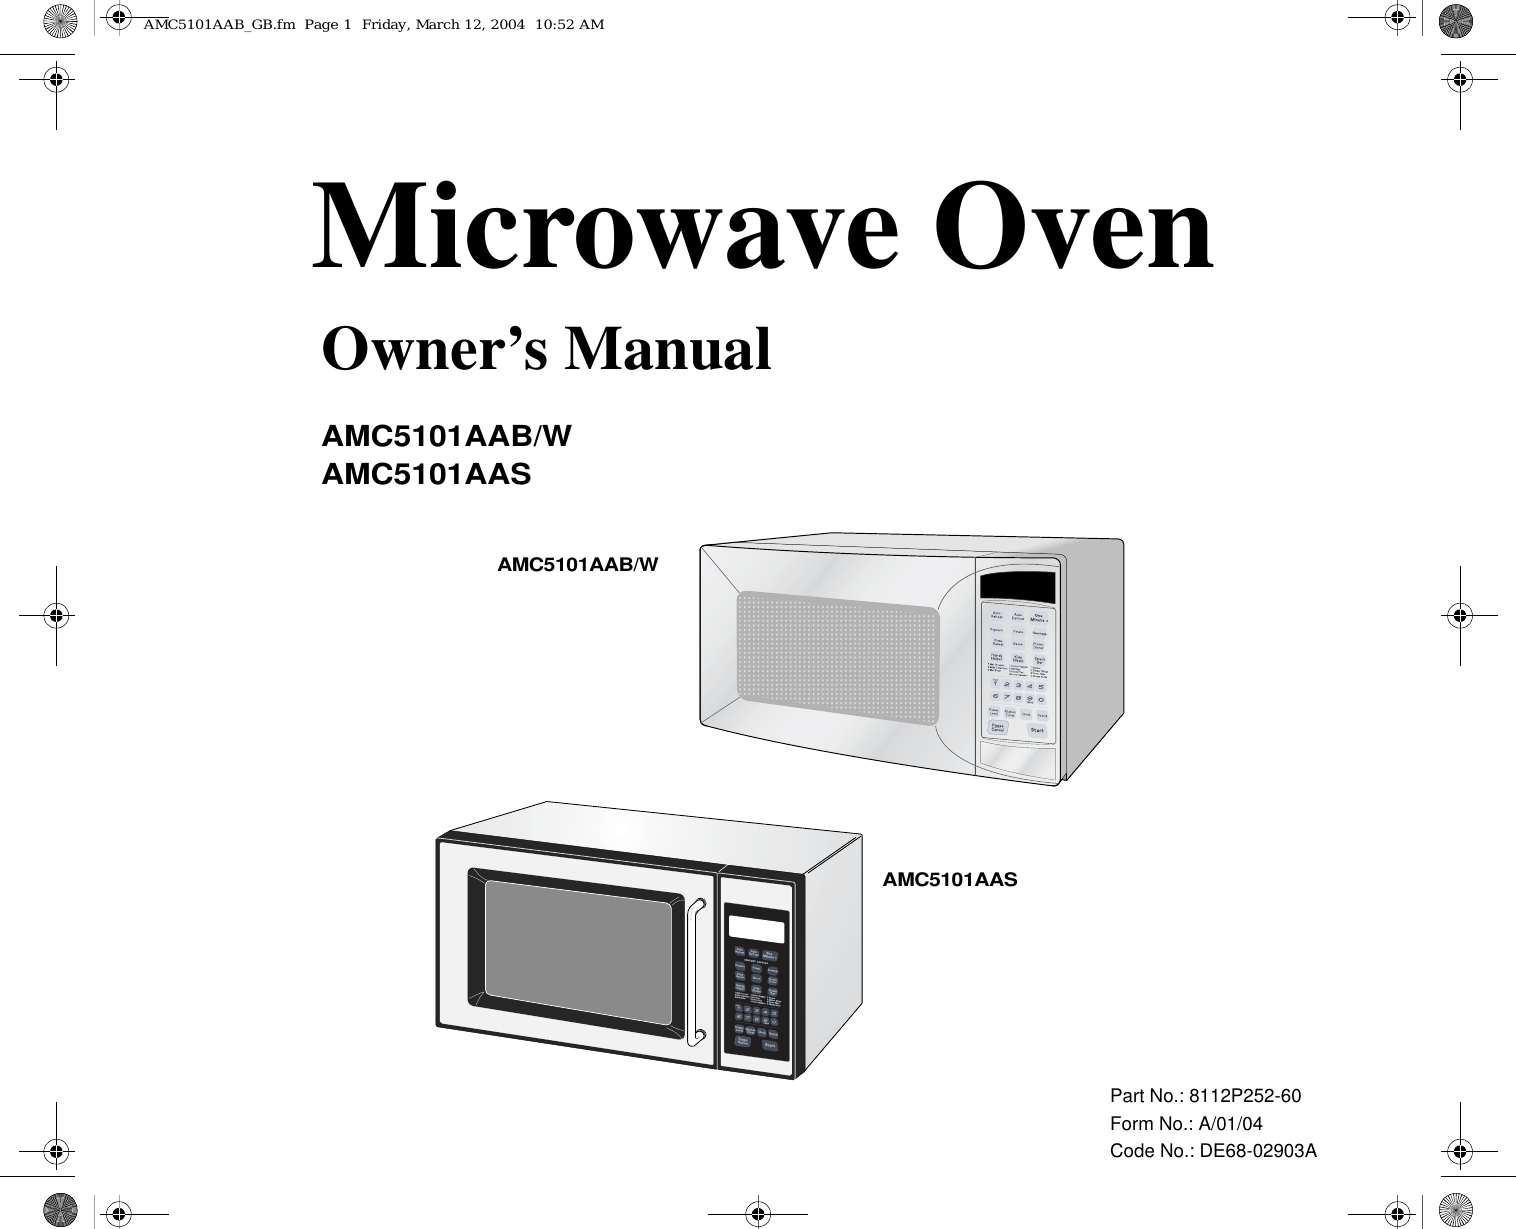 Part No.: 8112P252-60Form No.: A/01/04Code No.: DE68-02903AMicrowave OvenOwner’s ManualAMC5101AAB/WAMC5101AASAMC5101AAB/WAMC5101AASAMC5101AAB_GB.fm  Page 1  Friday, March 12, 2004  10:52 AM